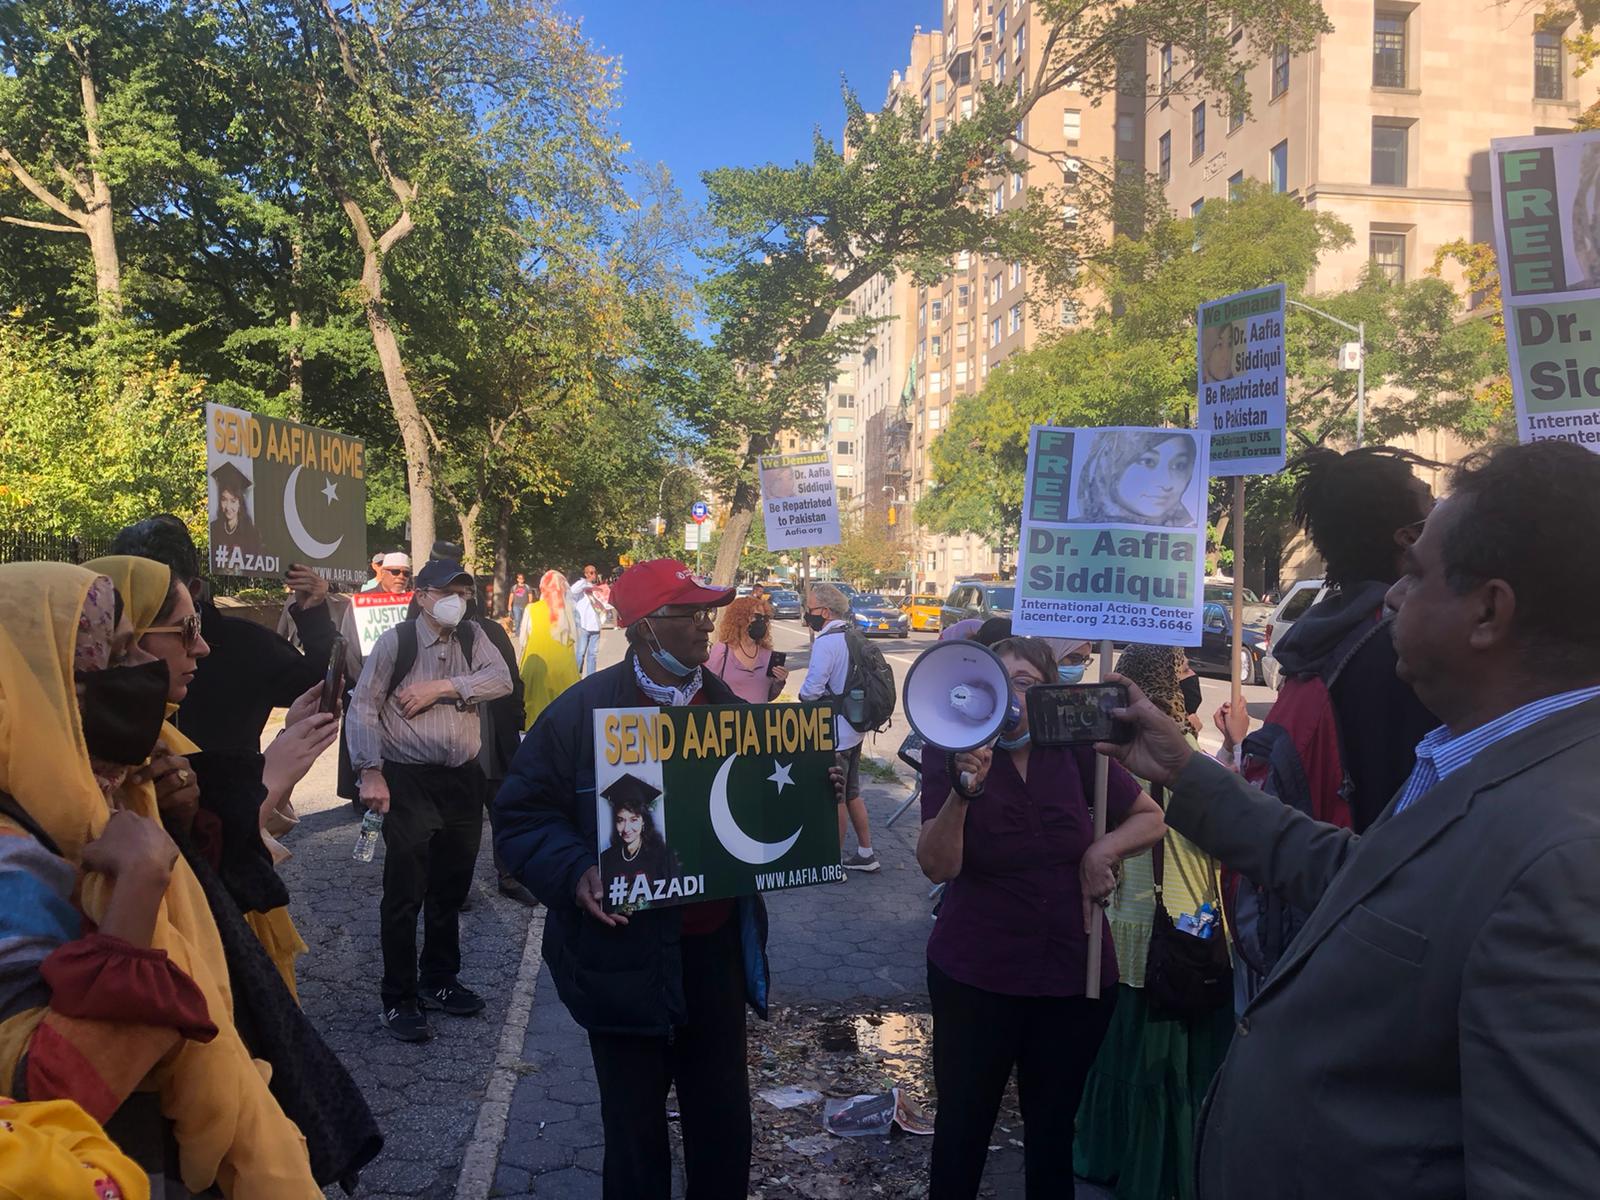 Protesters gather near the Pakistani consulate in New York City to demand the release of Aafia Siddiqui.